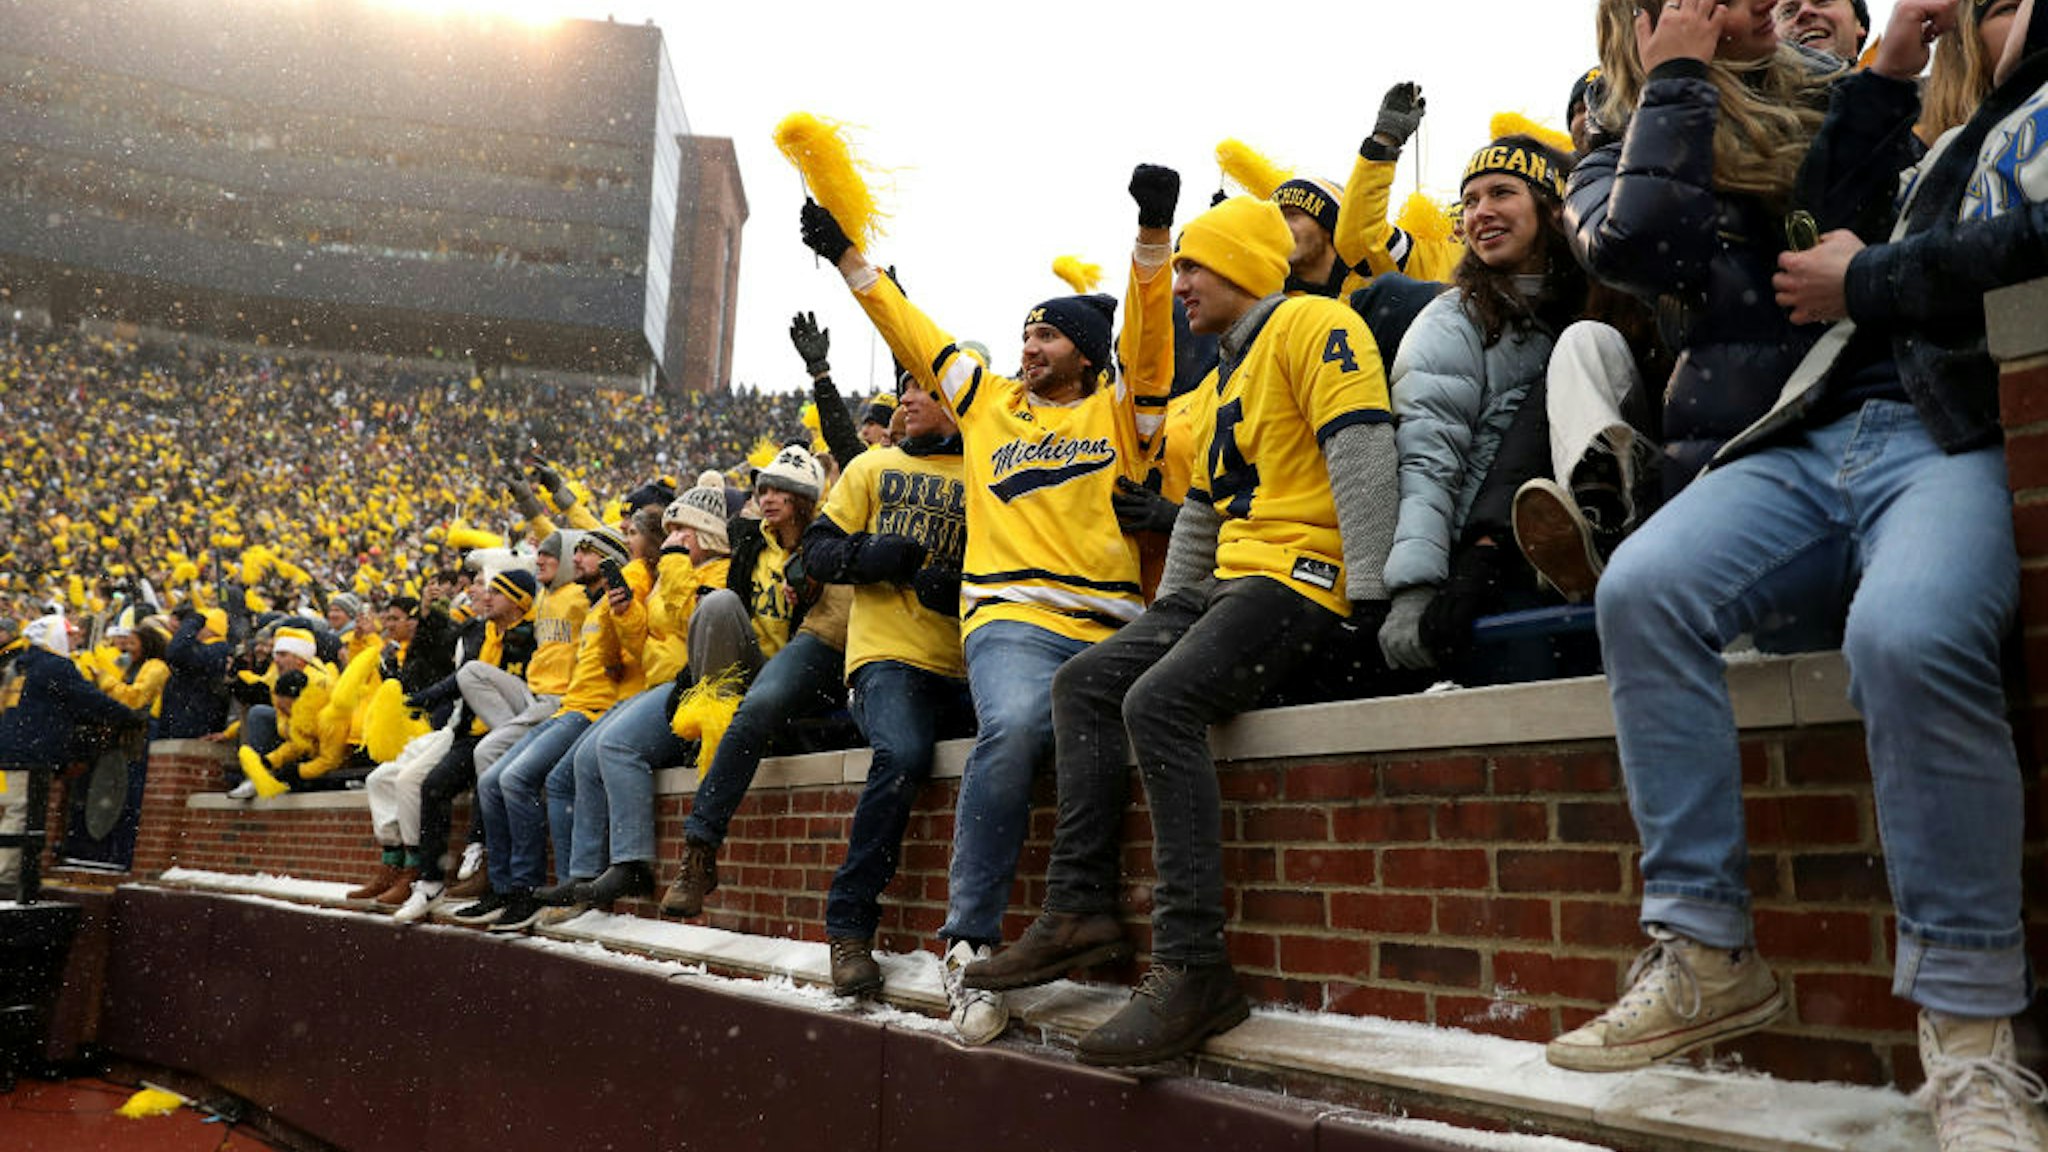 ANN ARBOR, MICHIGAN - NOVEMBER 27: Michigan Wolverines fans prepare to storm the field after the Wolverines victory over the Ohio State Buckeyes at Michigan Stadium on November 27, 2021 in Ann Arbor, Michigan. (Photo by Mike Mulholland/Getty Images)